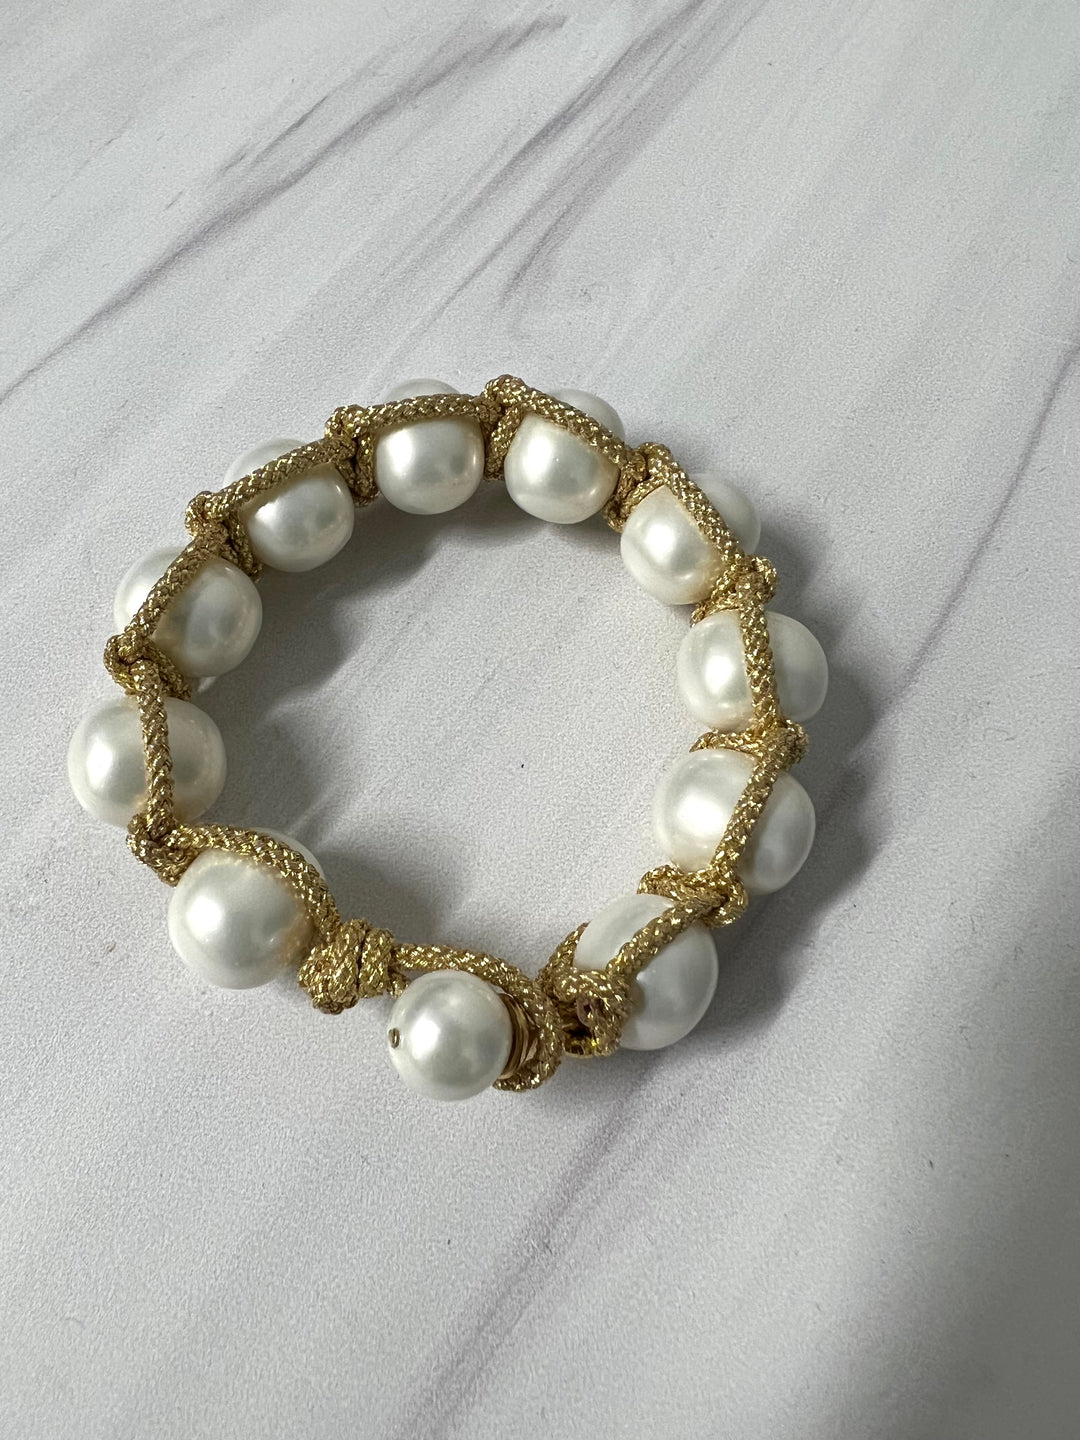 Pearl Macrame Bracelet with button clasp